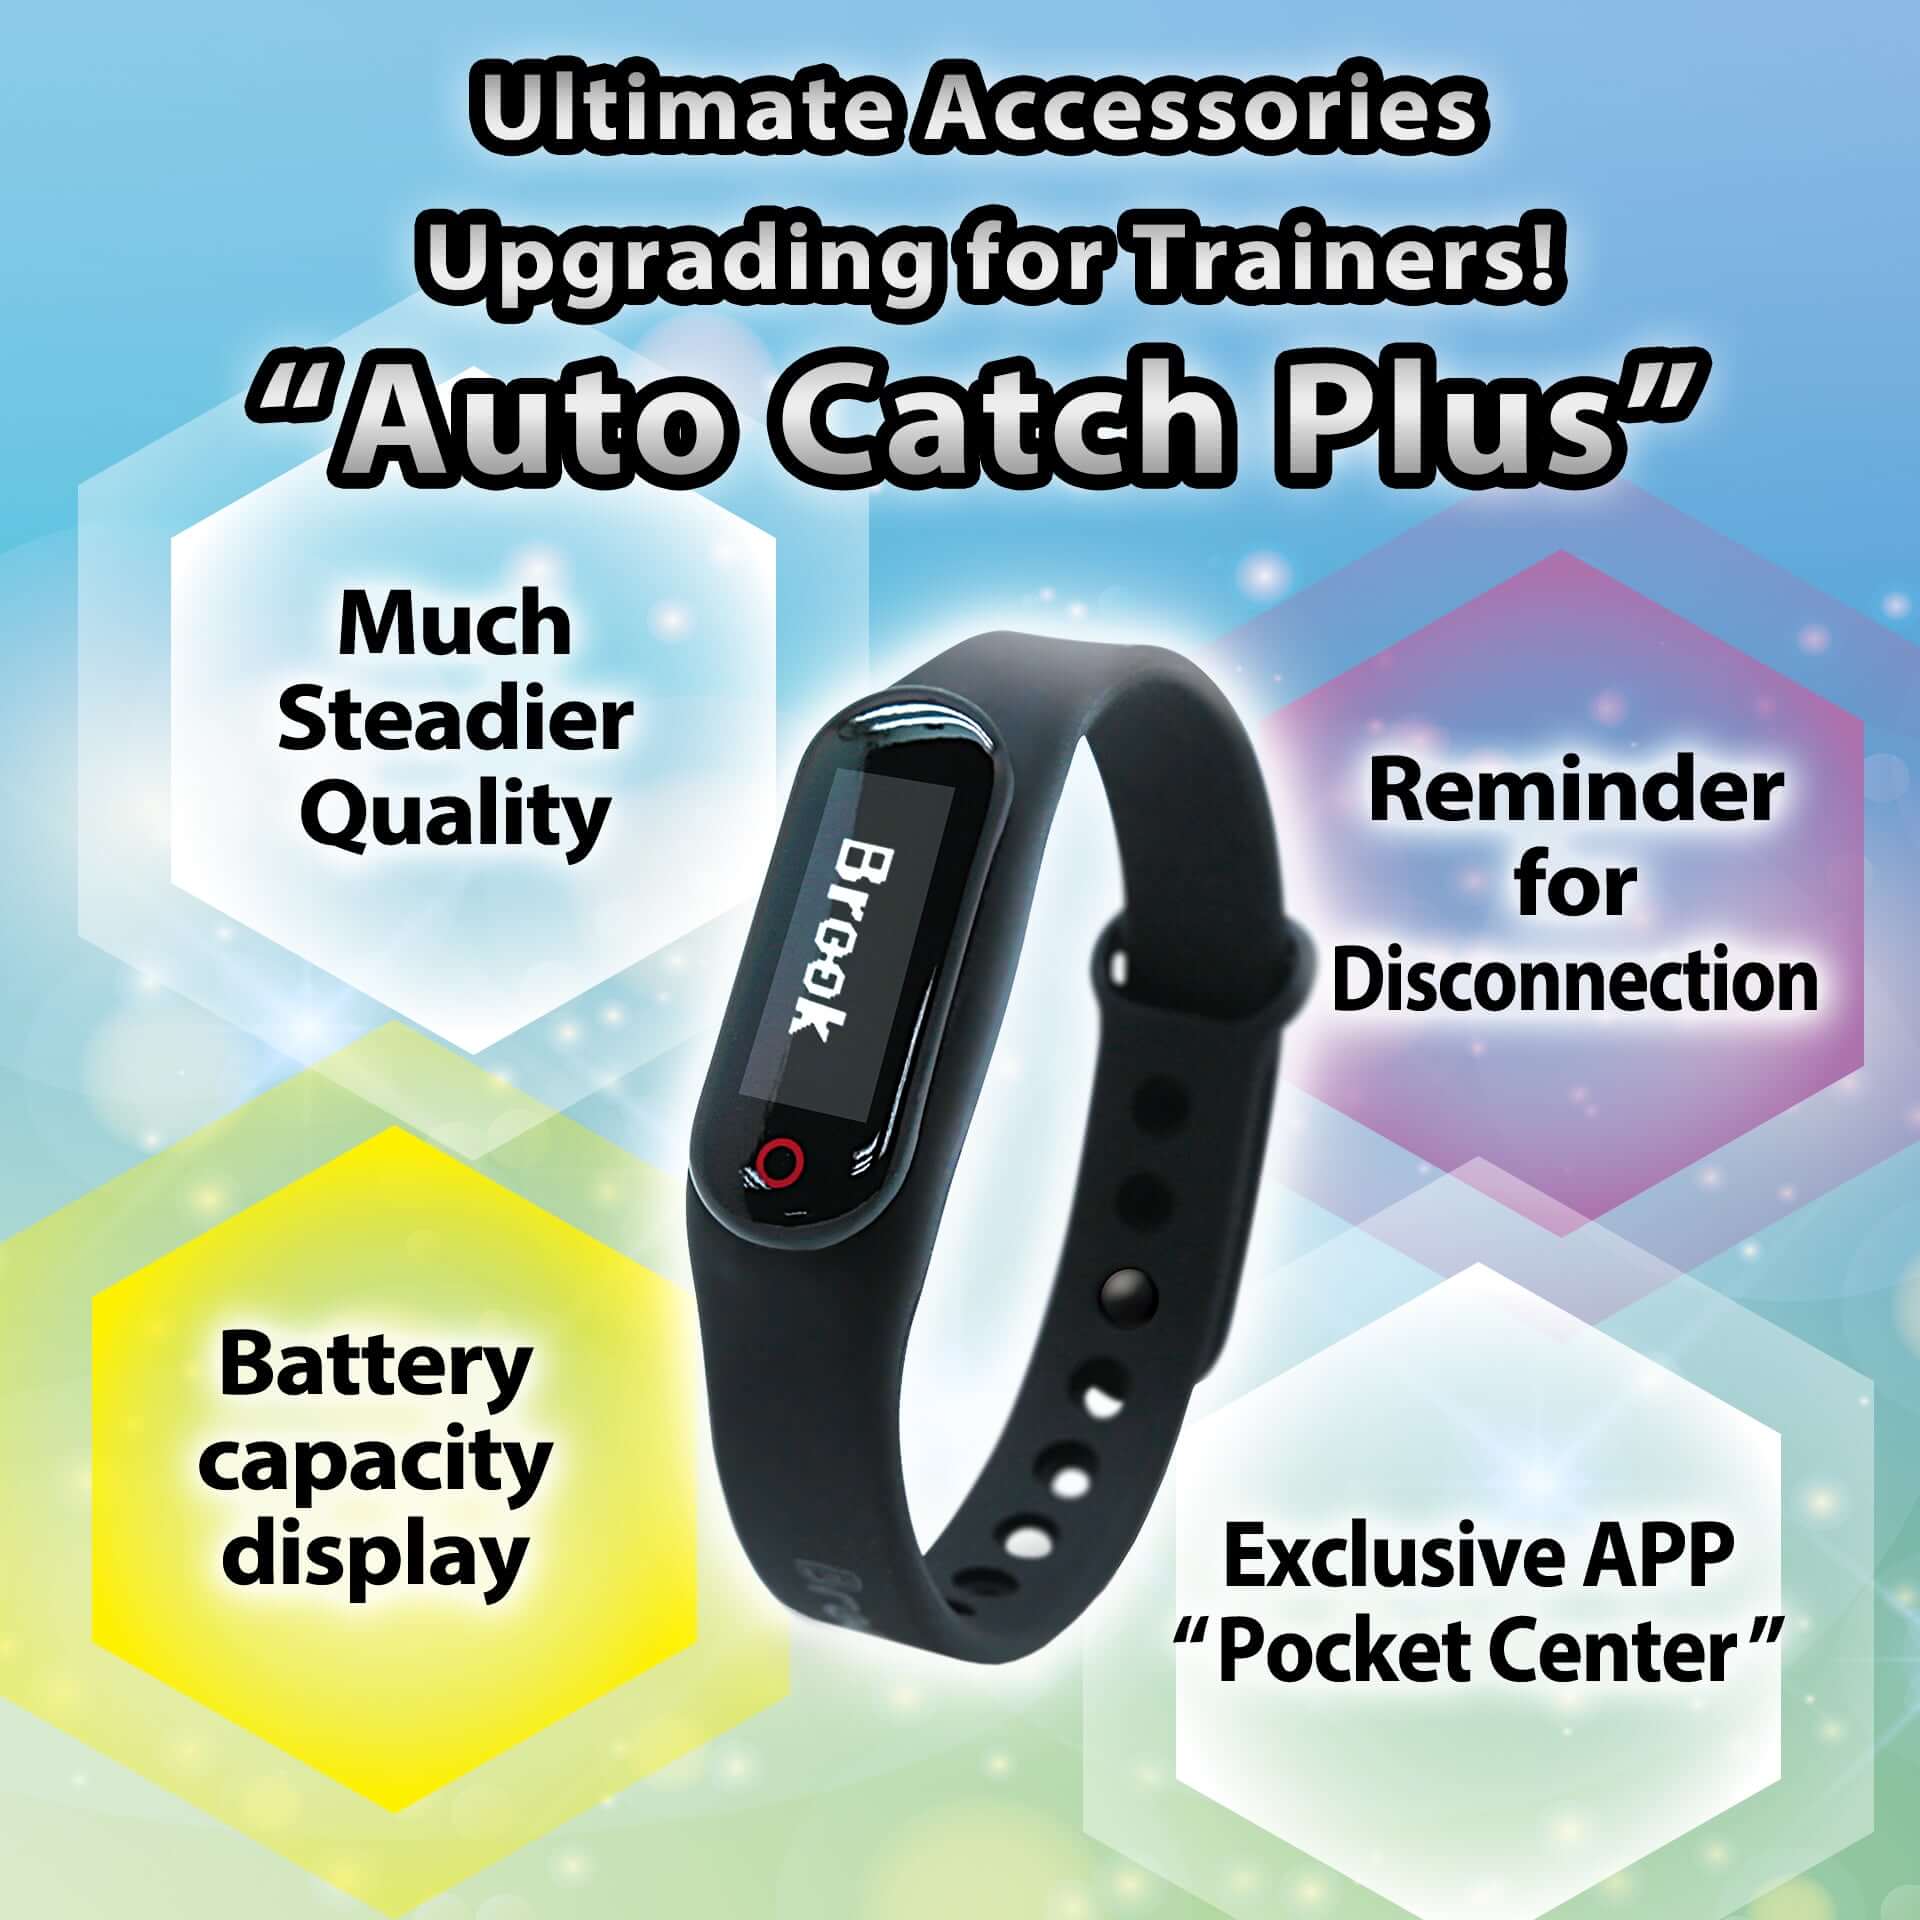 Brook Auto Catch Plus stable quality